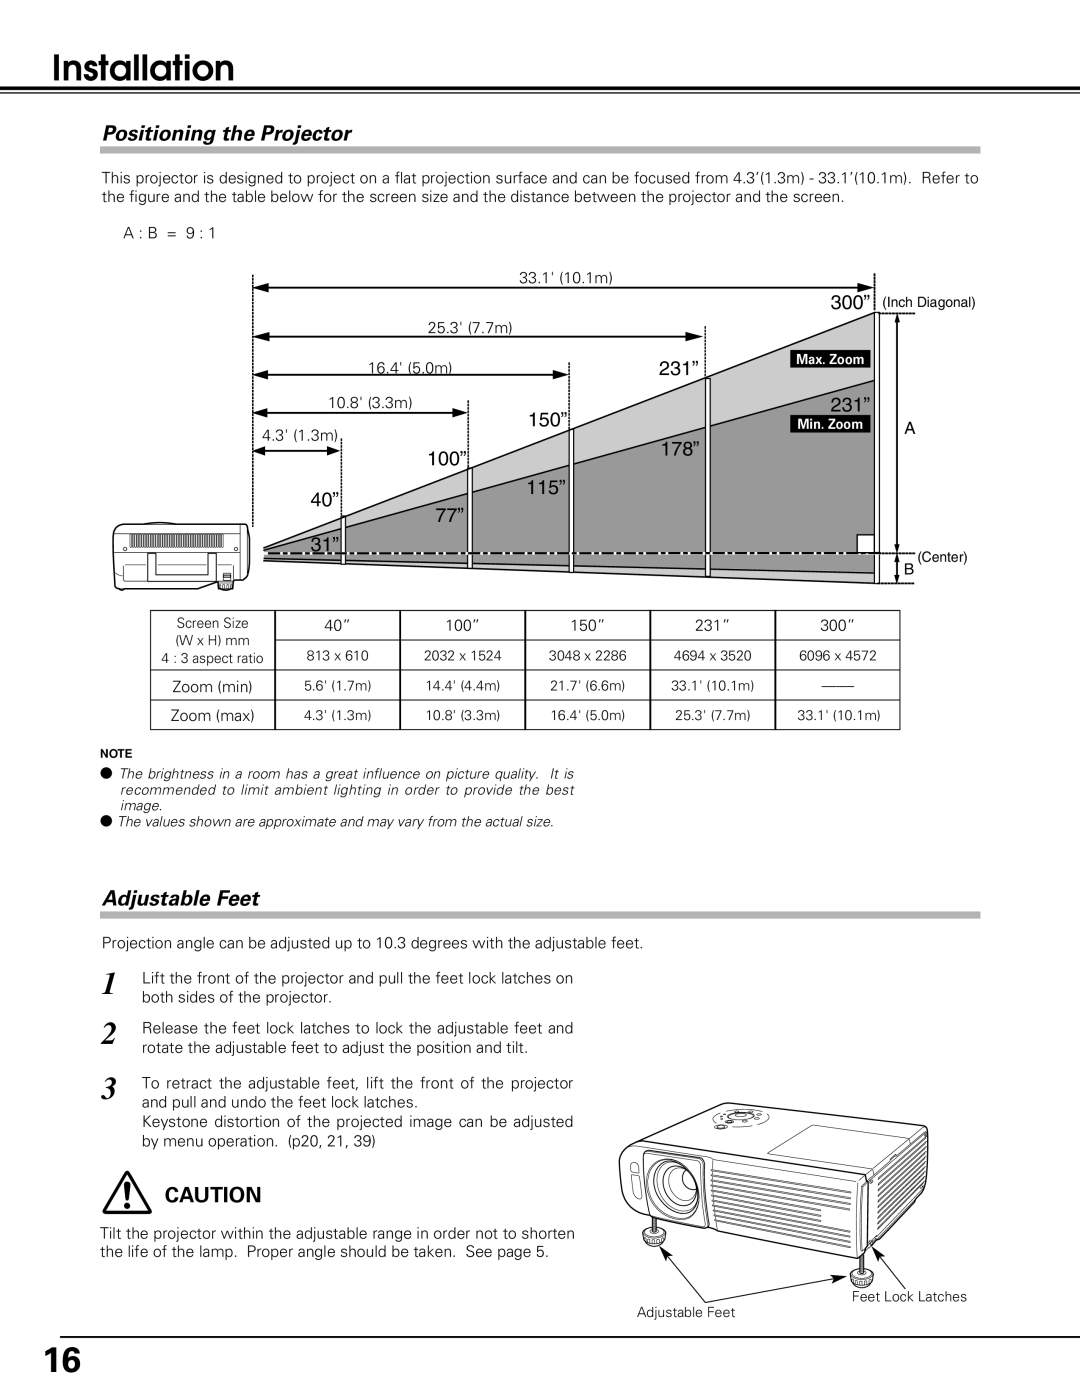 Black Box LC-XE10 instruction manual Installation, Positioning the Projector, Adjustable Feet 